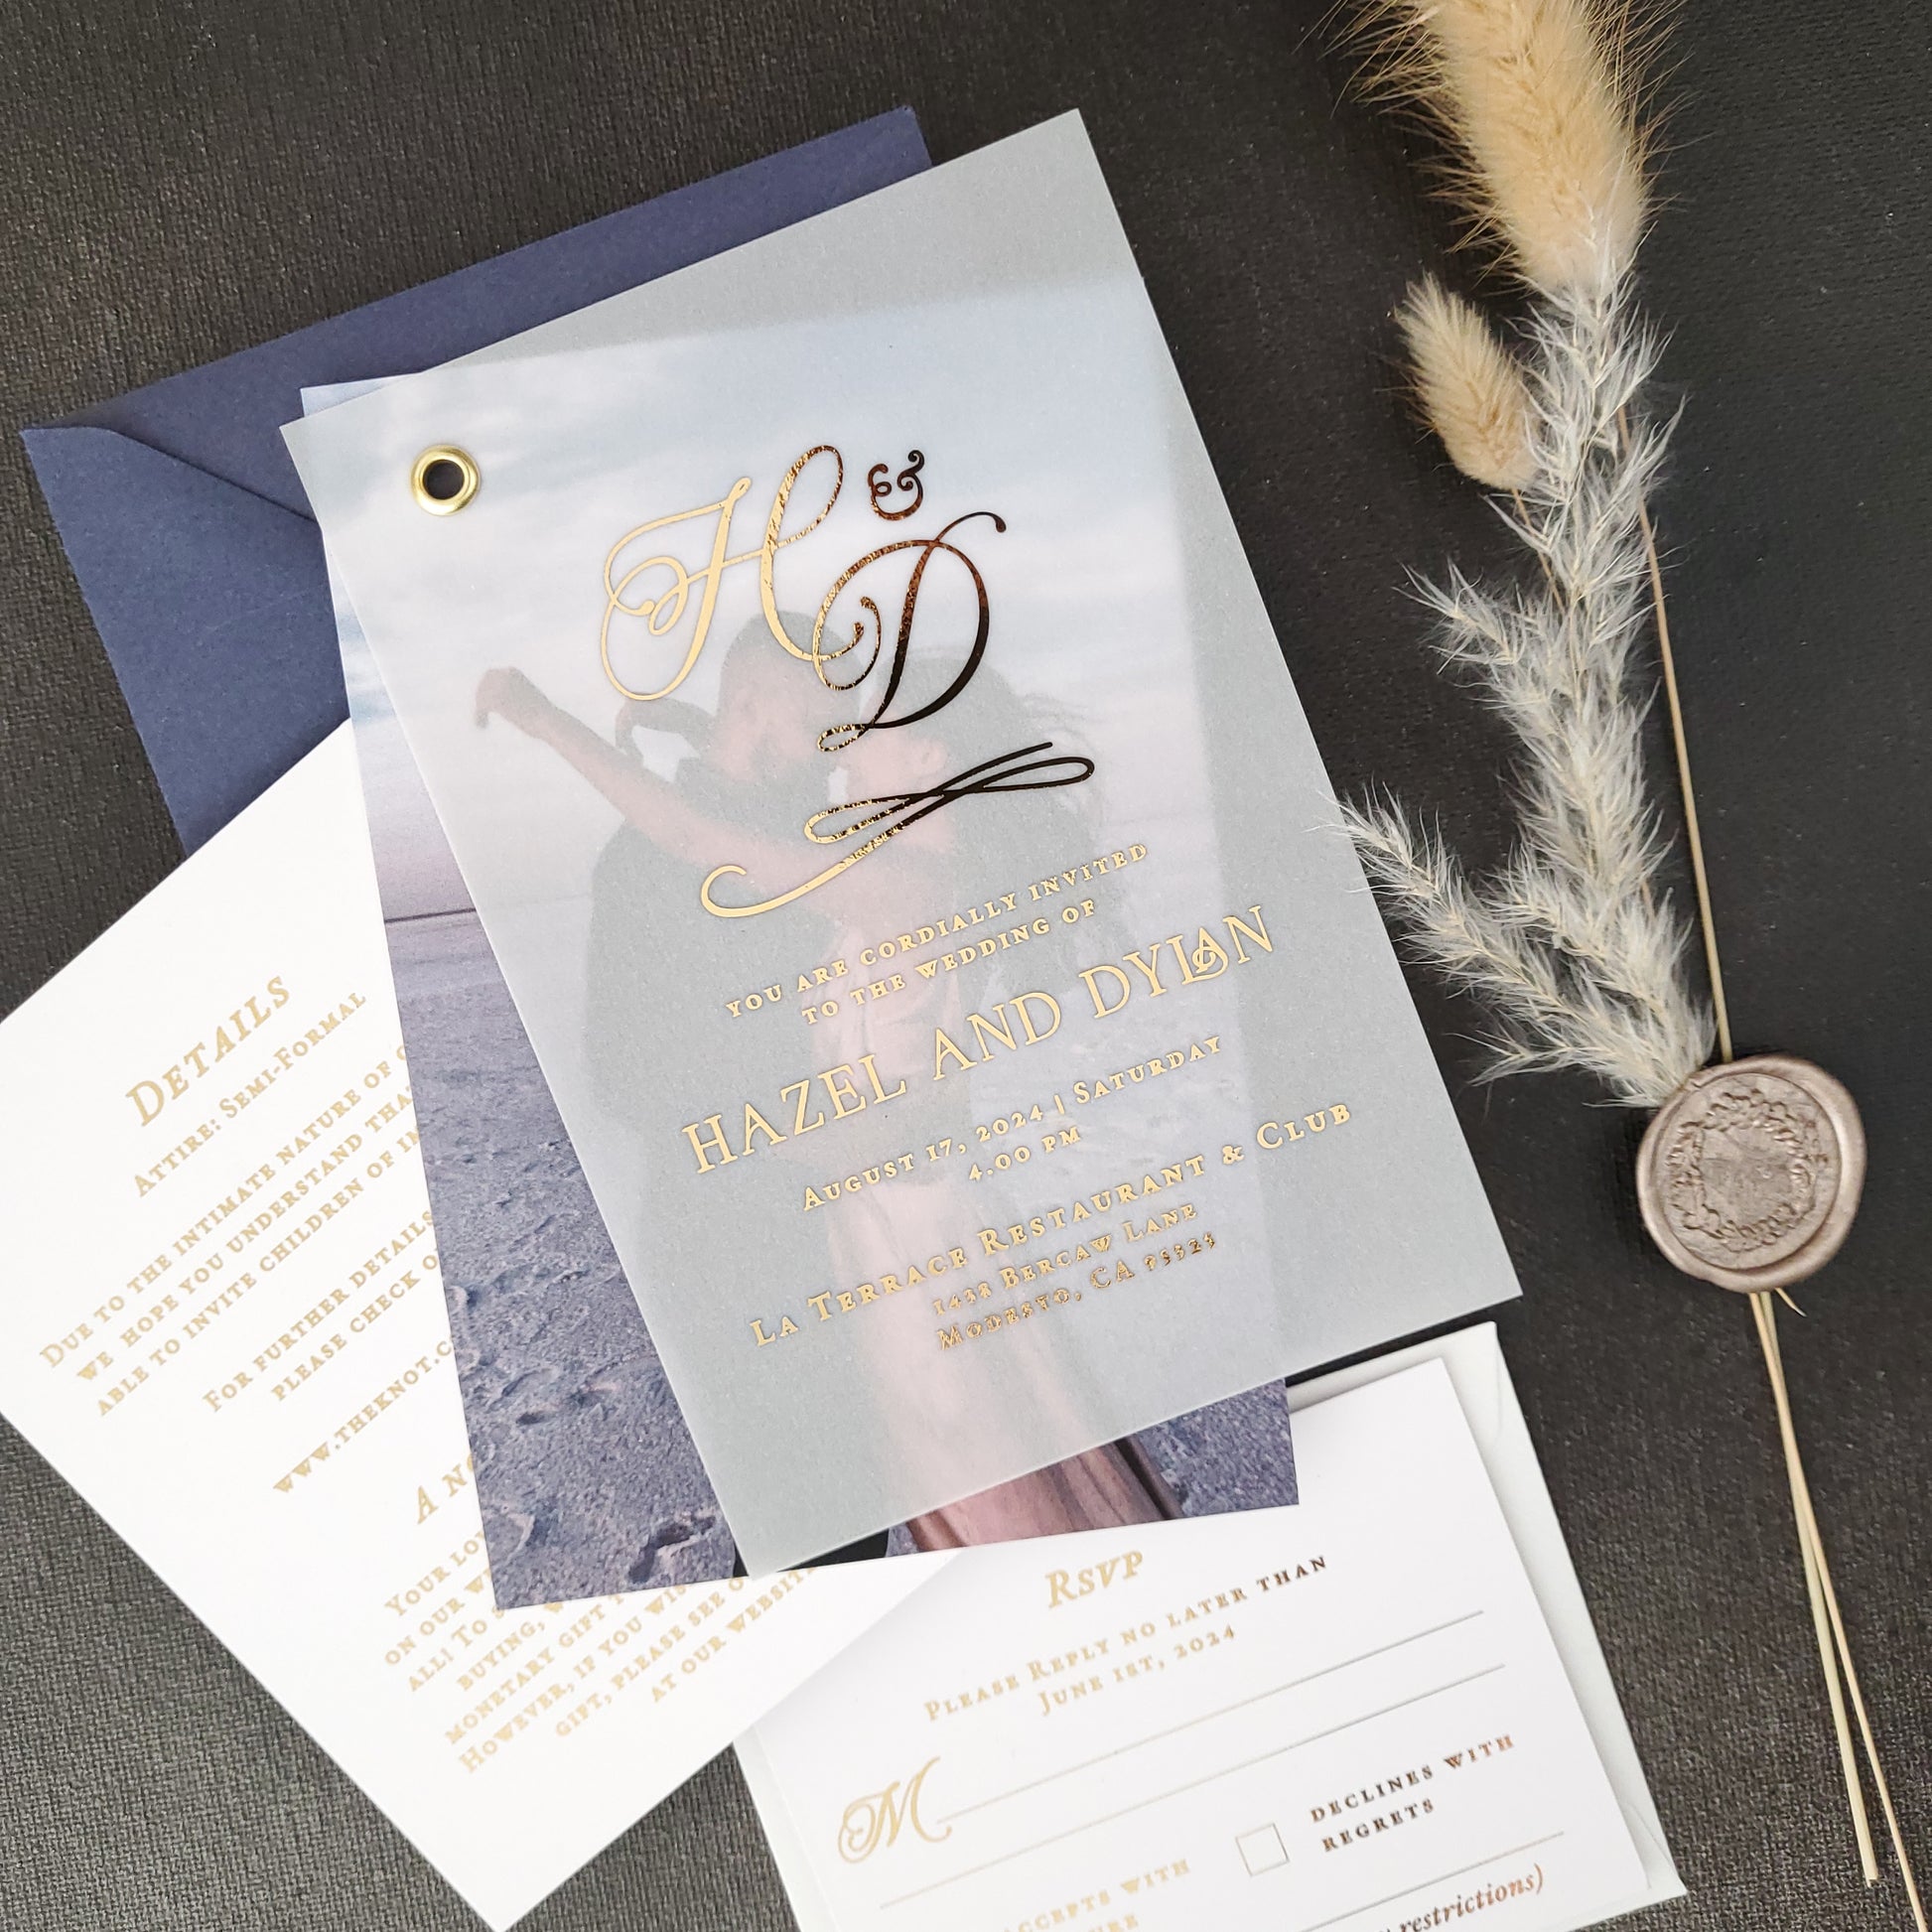 gold foiled vellum wedding suite with invitations, rsvp cards and detail cards - XOXOKristen